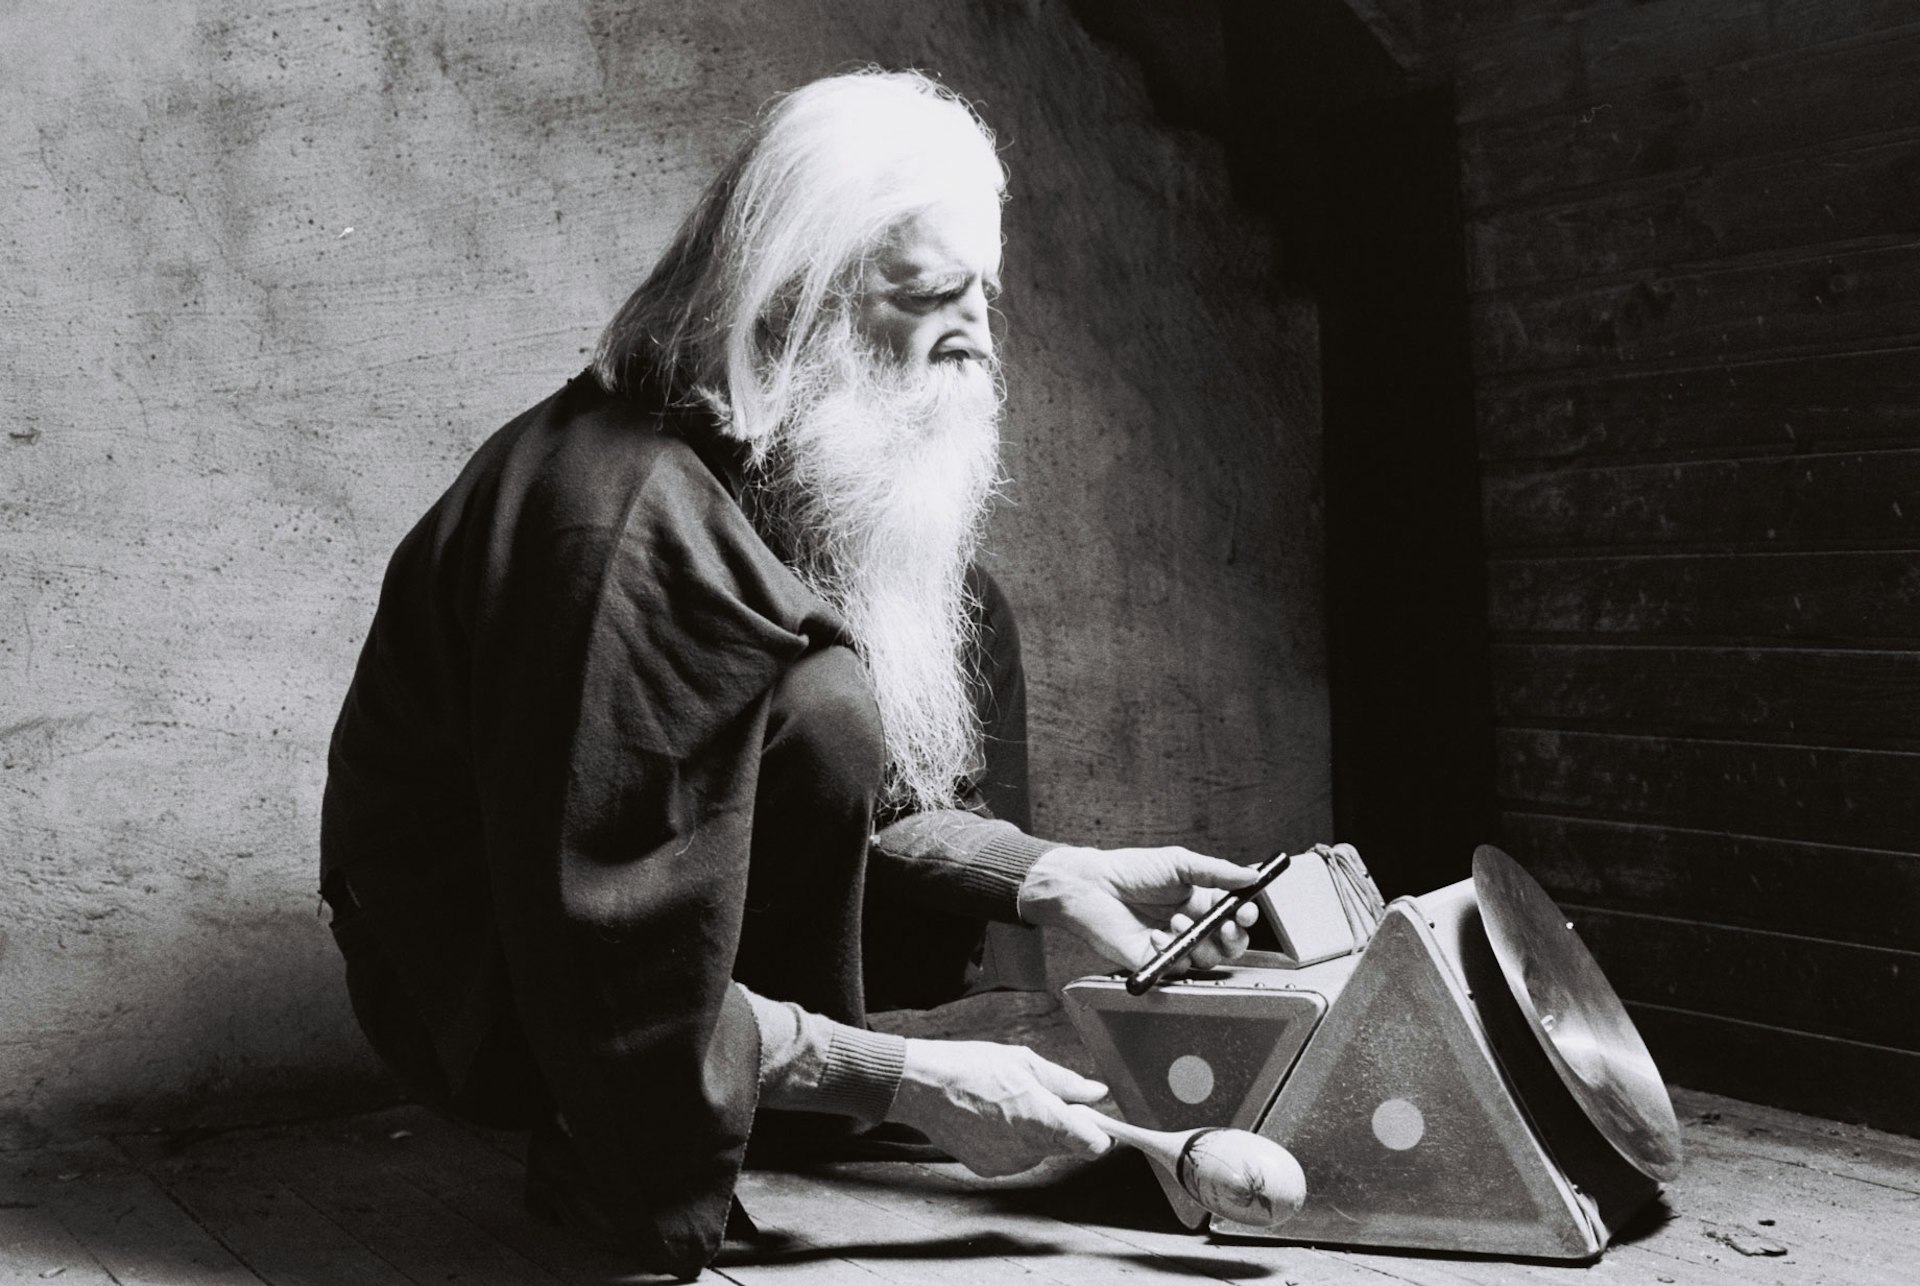 Moondog in Germany, circa 1980. Photo by Stefan Lakatos, courtesy Hark Pictures.